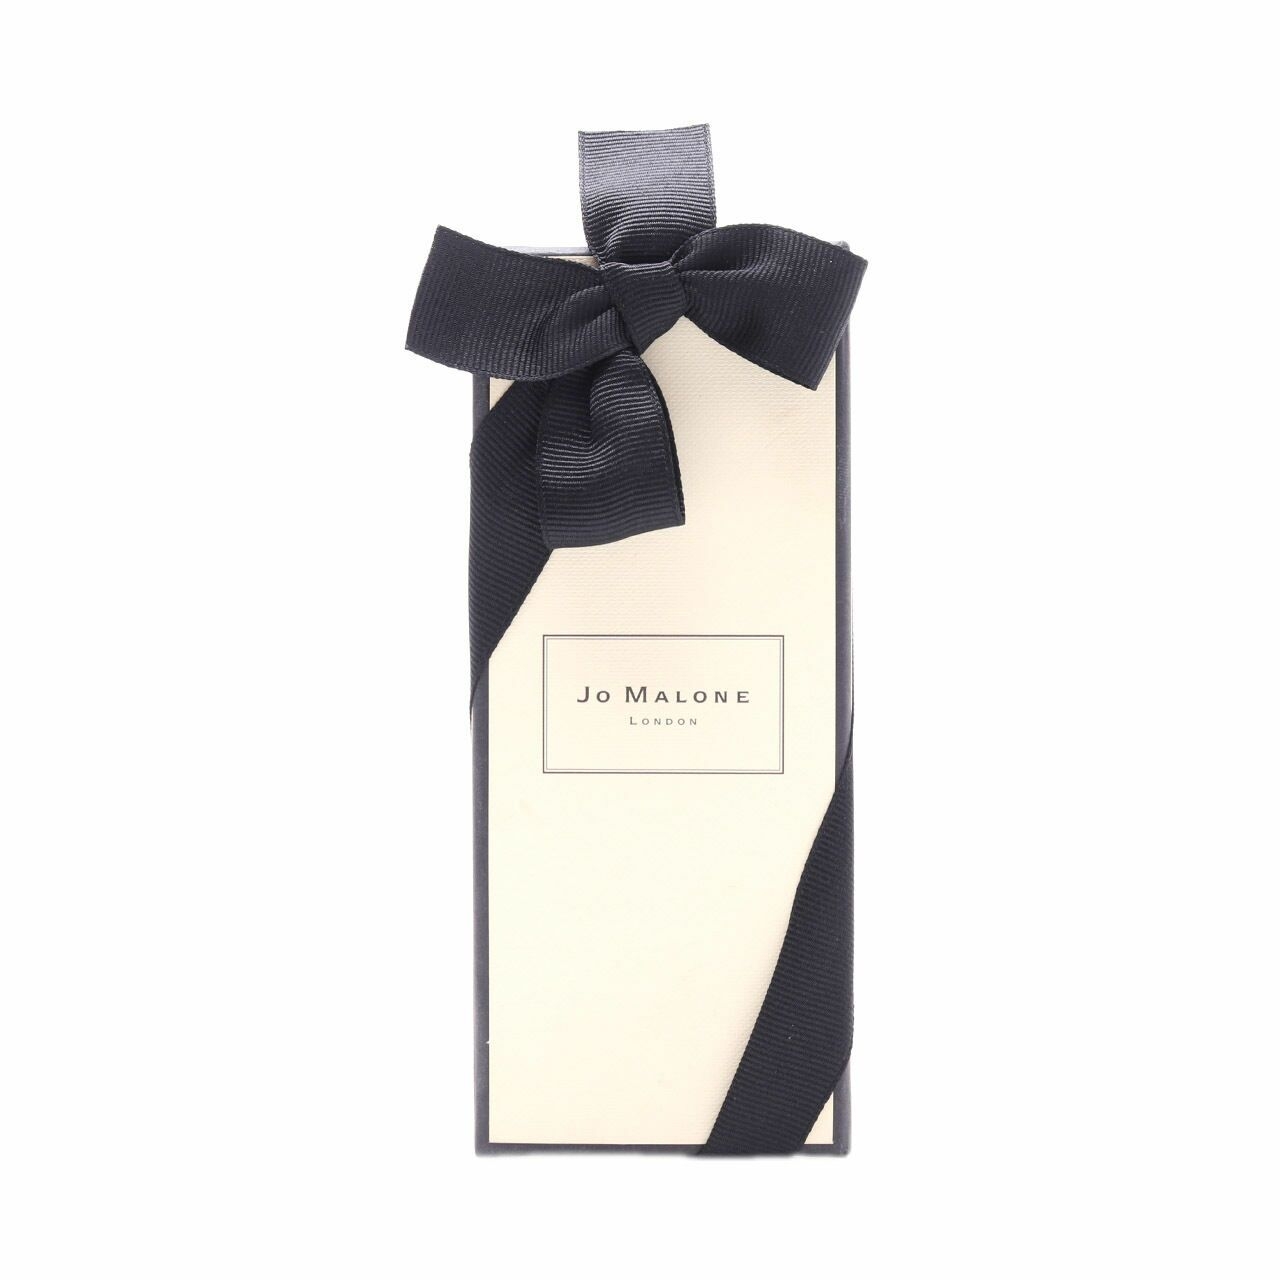 Jo Malone Peony & Blush Suede Cologne Fragrance